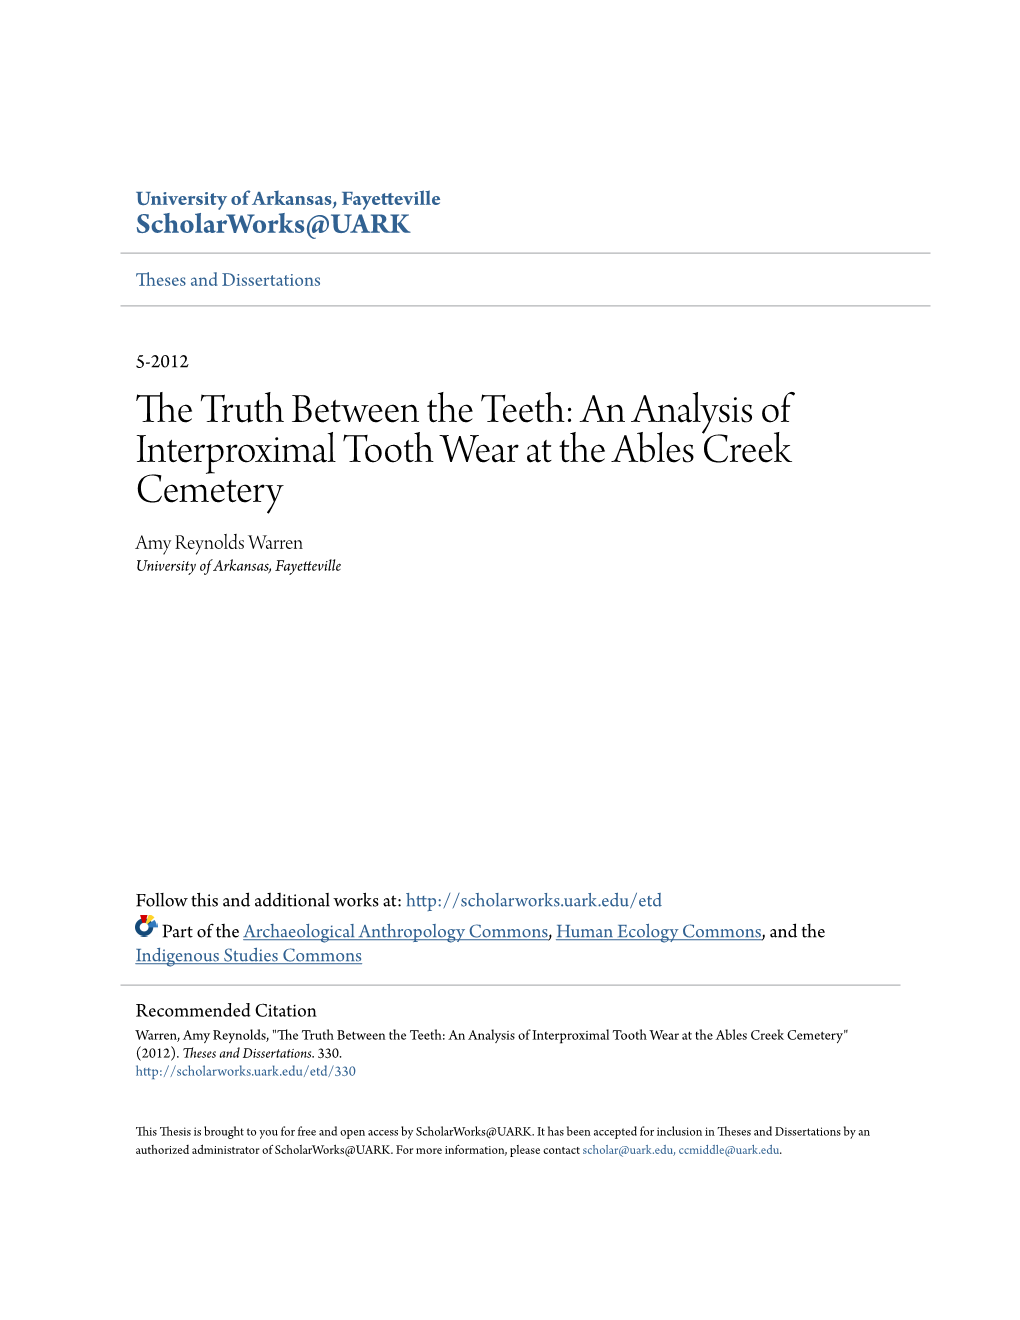 An Analysis of Interproximal Tooth Wear at the Ables Creek Cemetery Amy Reynolds Warren University of Arkansas, Fayetteville